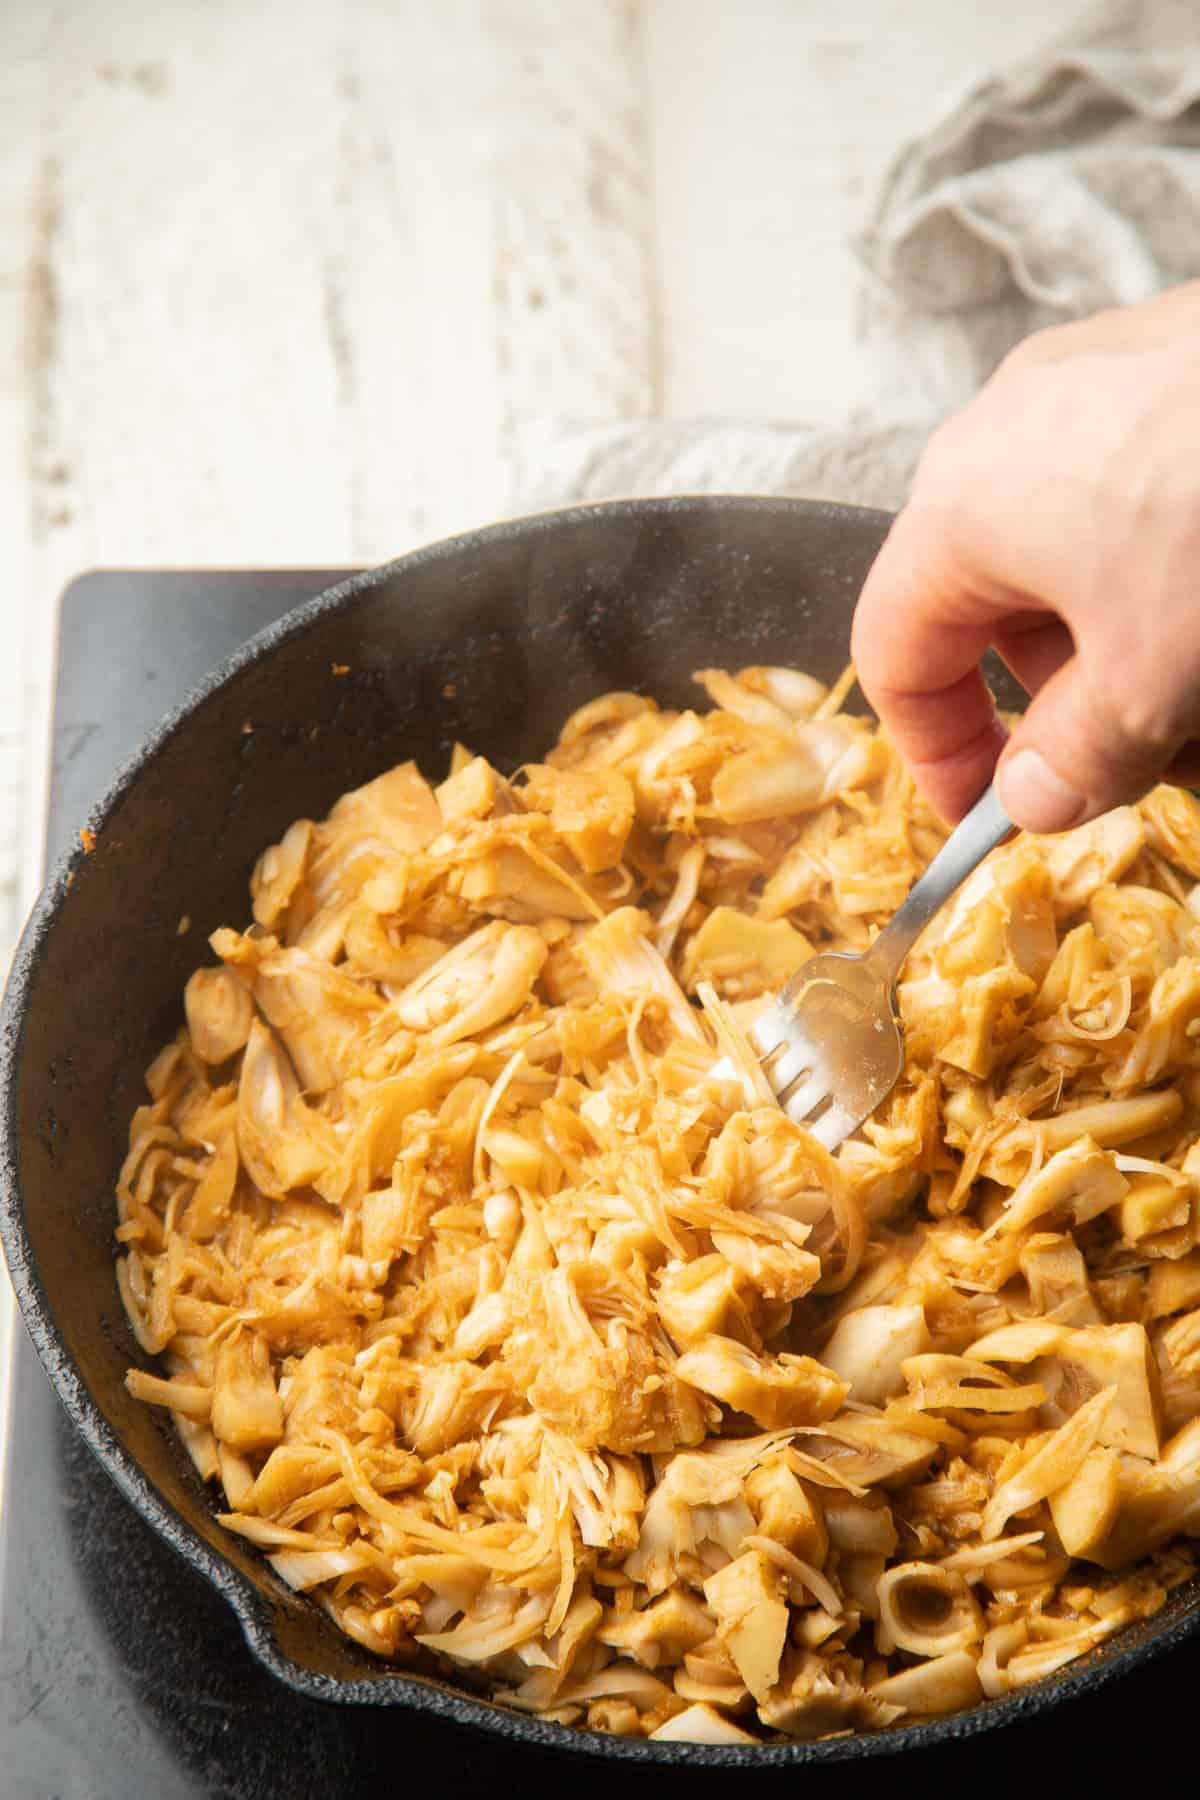 Hand with a fork pulling apart pieces of jackfruit in a skillet.